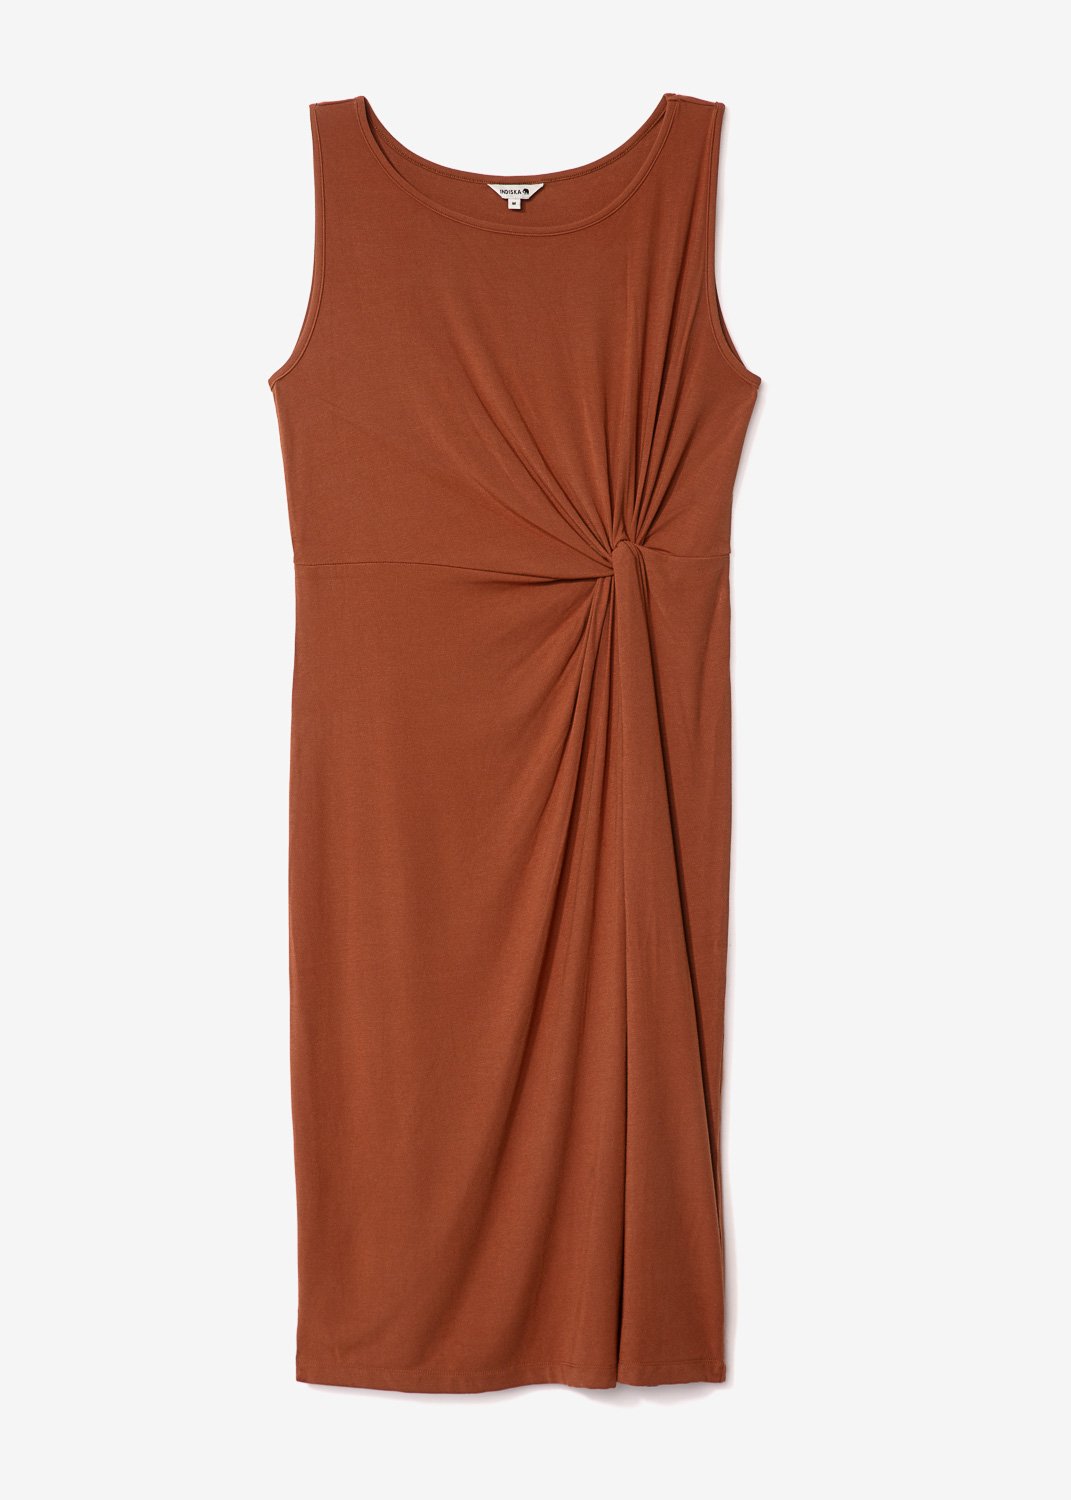 Brown dress with knot